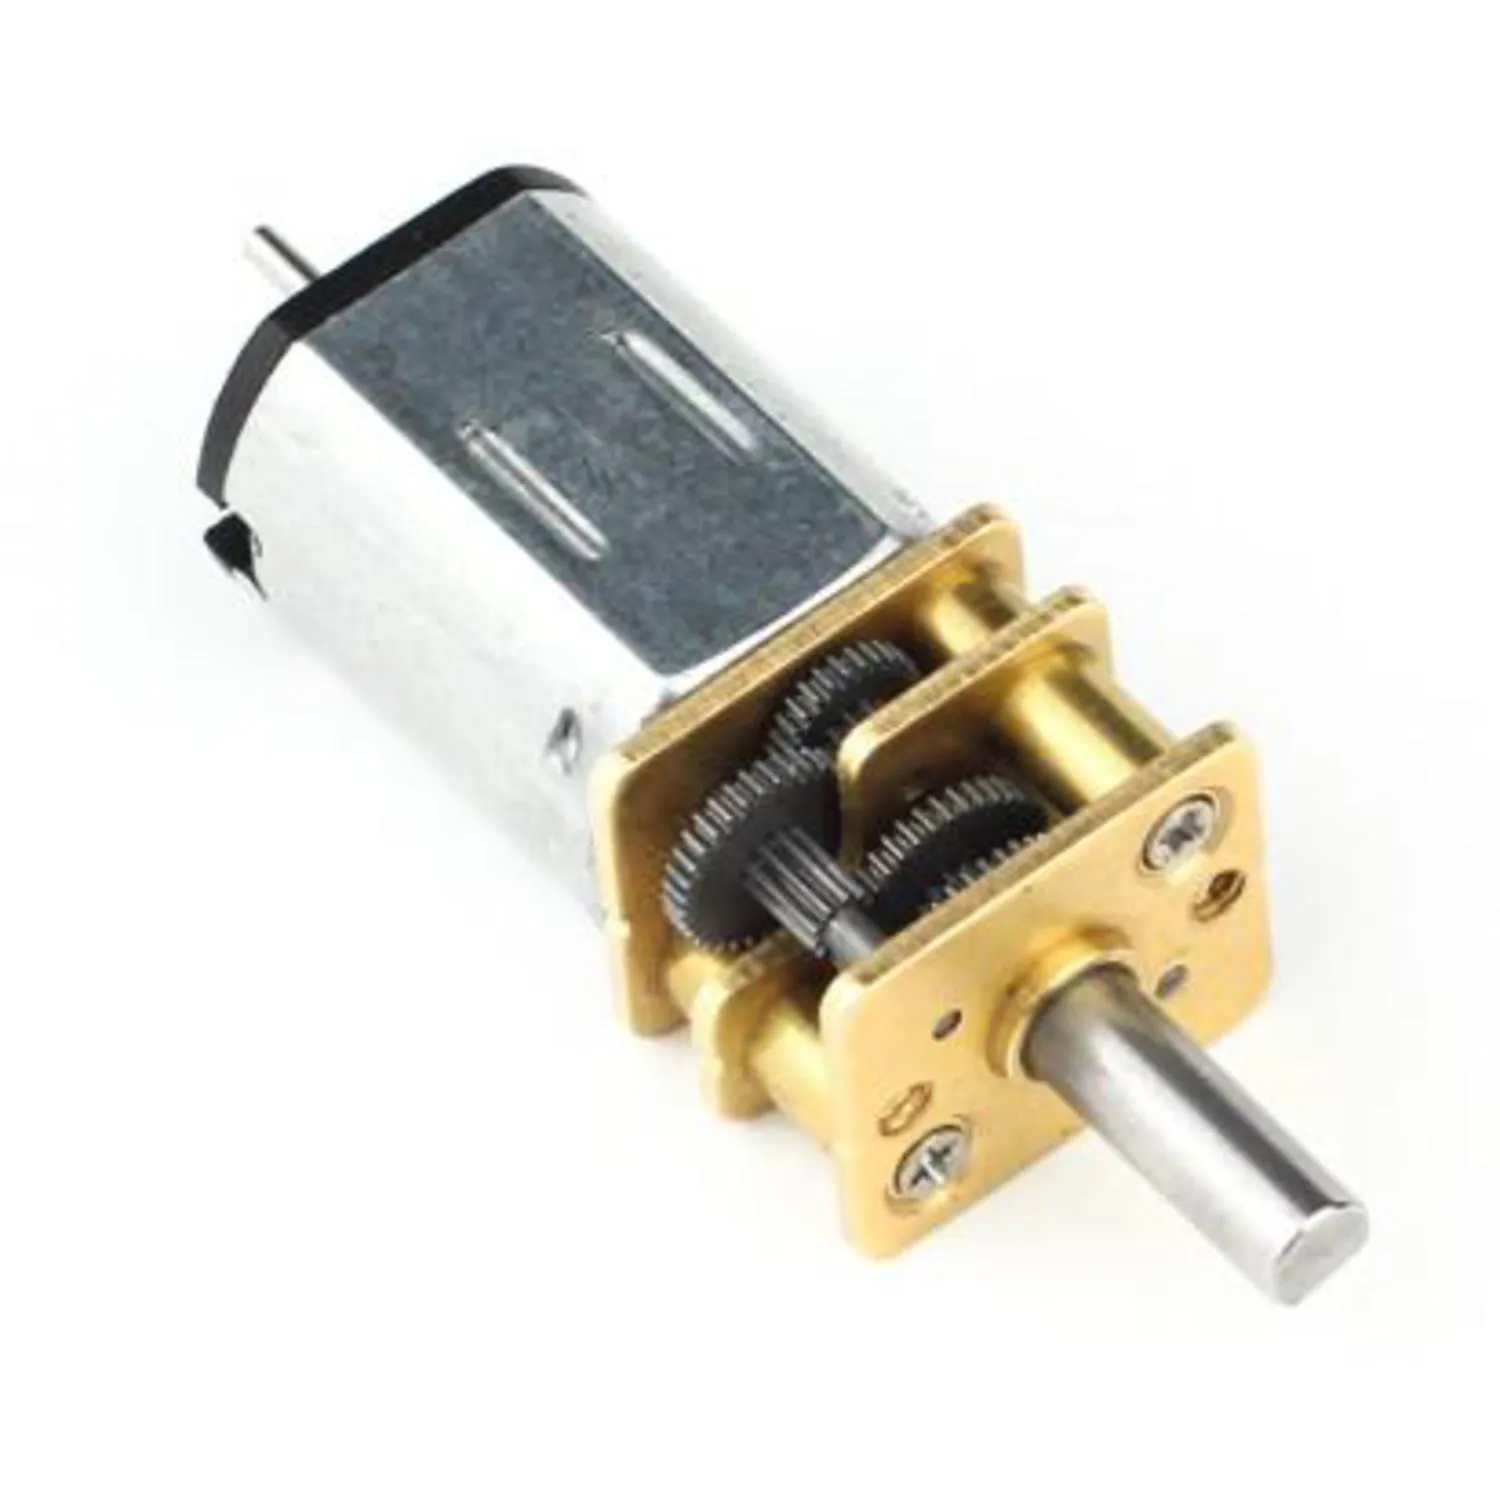 Photo of Micro Metal Gearmotor (Extended back shaft) - 1006:1